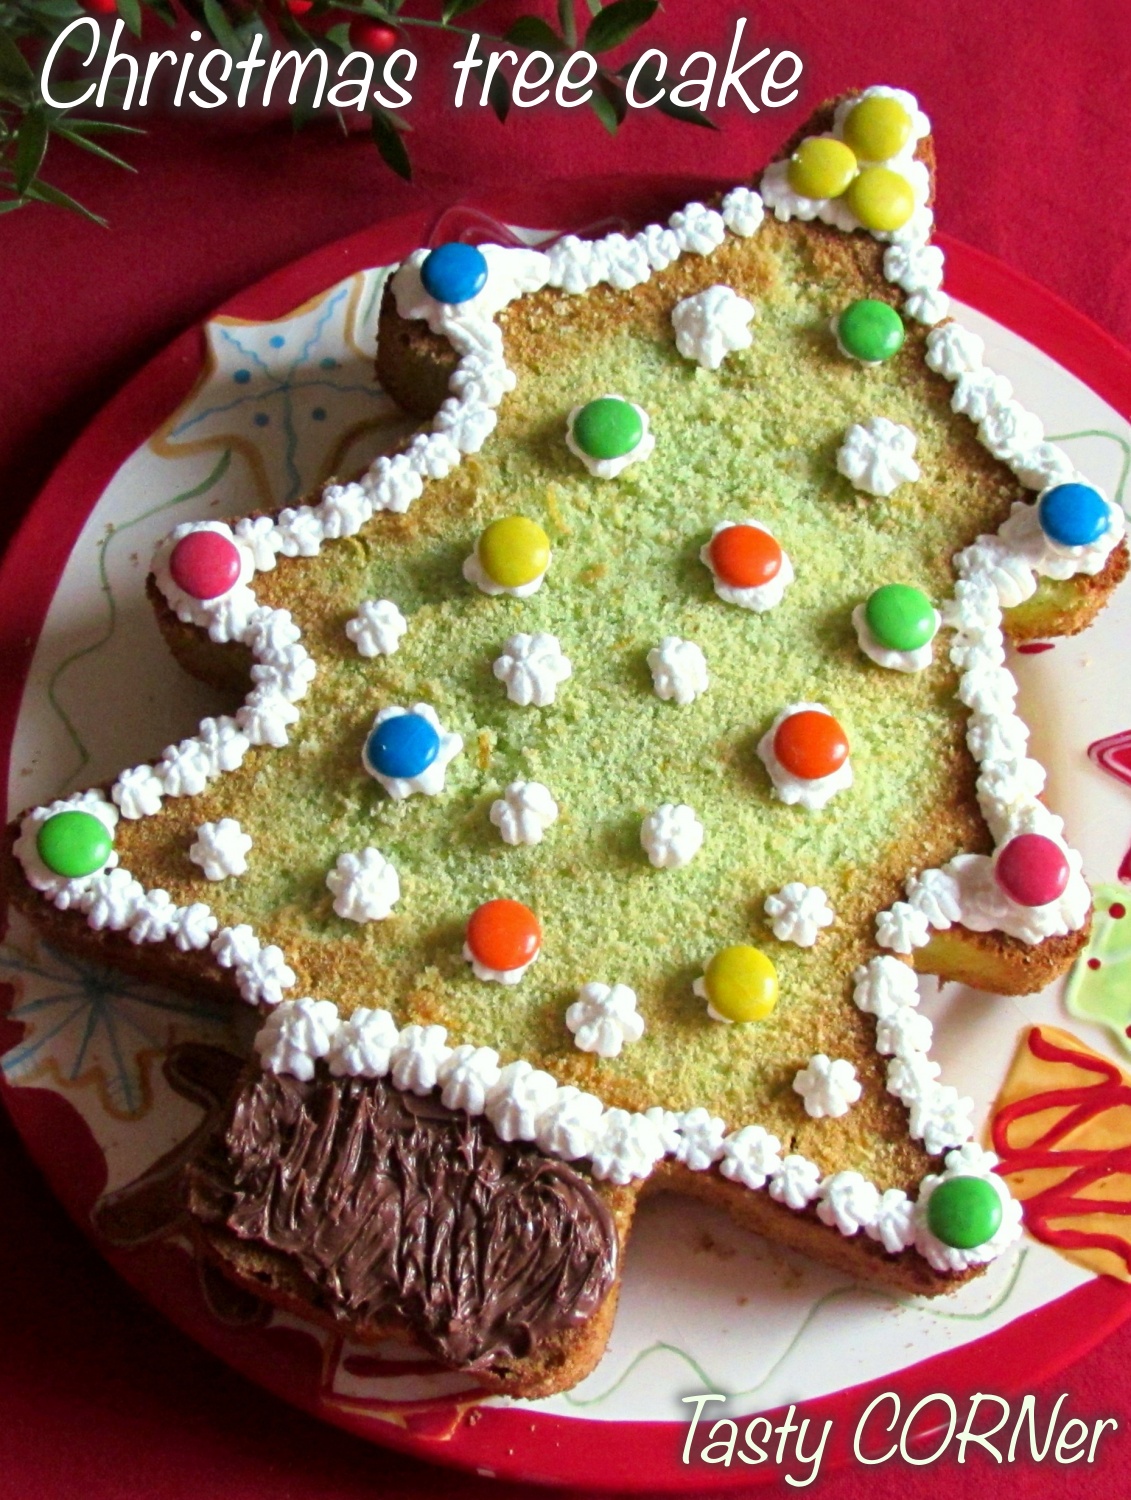 en_v_ easy christmas tree cake quick recipe sponge cake simply decorated with M&M's by tasty corner blog